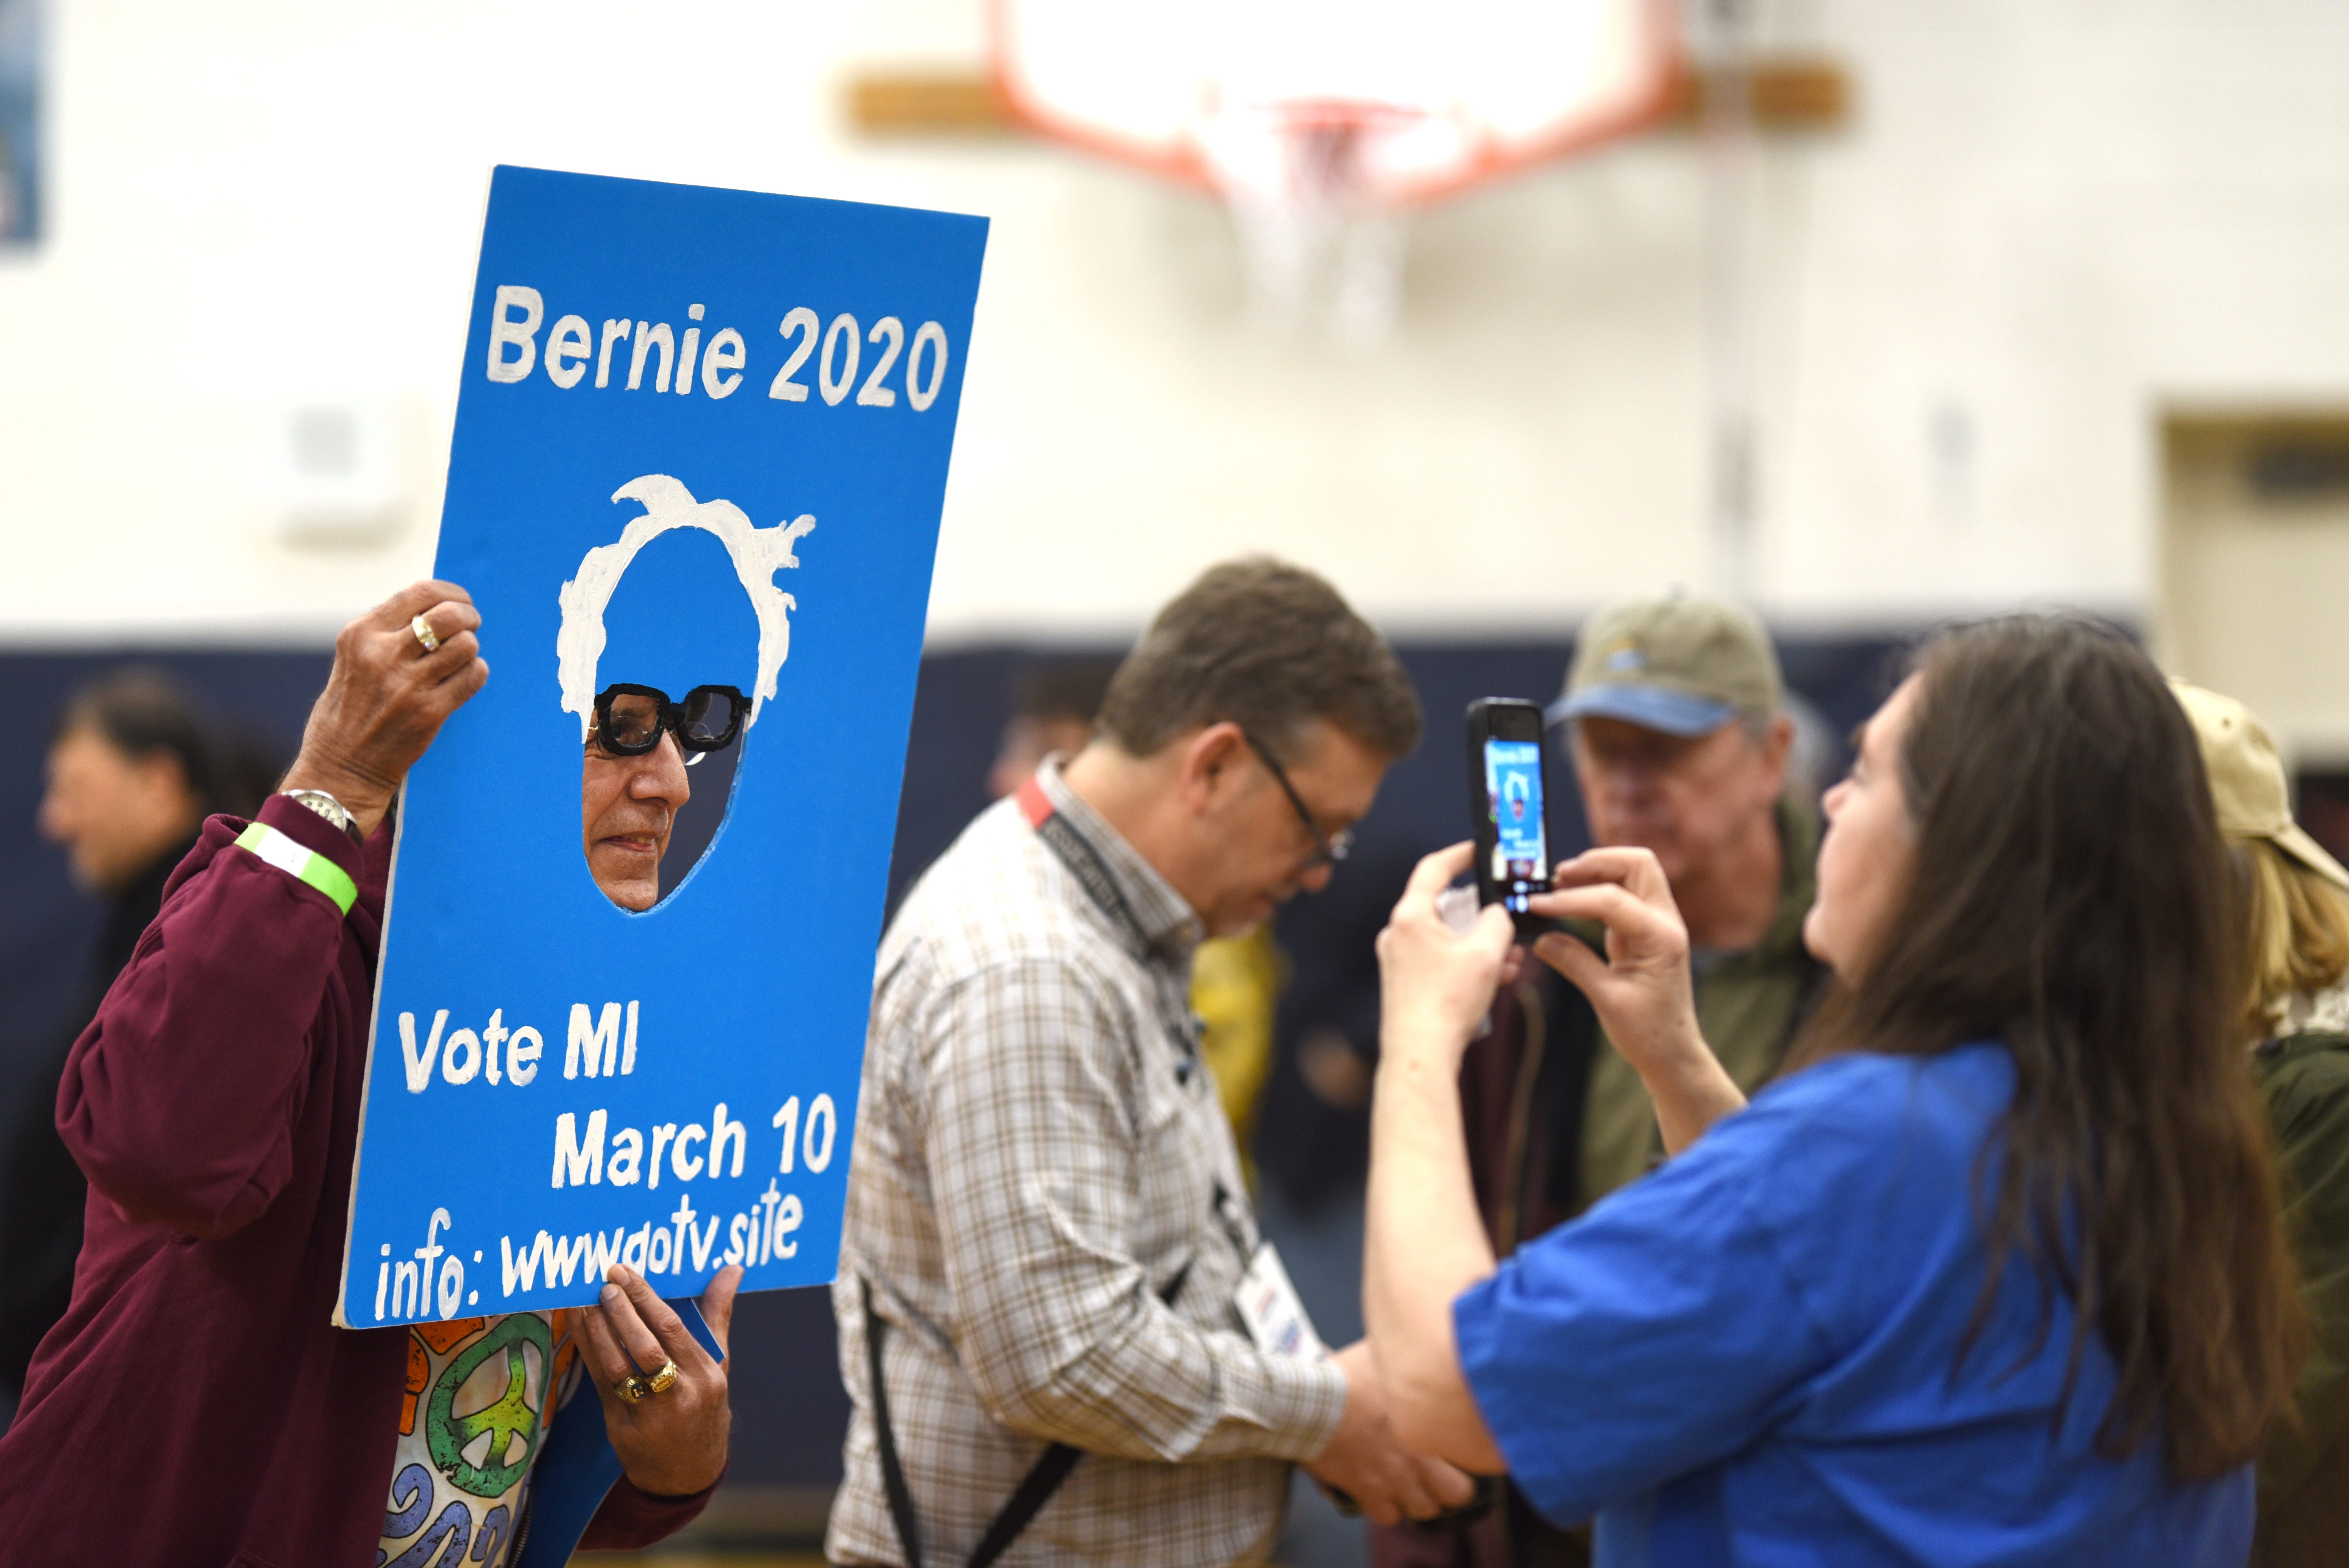 Joseph Borrajo, left, of Dearborn peers through a get out the vote poster during a Bernie Sanders campaign stop.